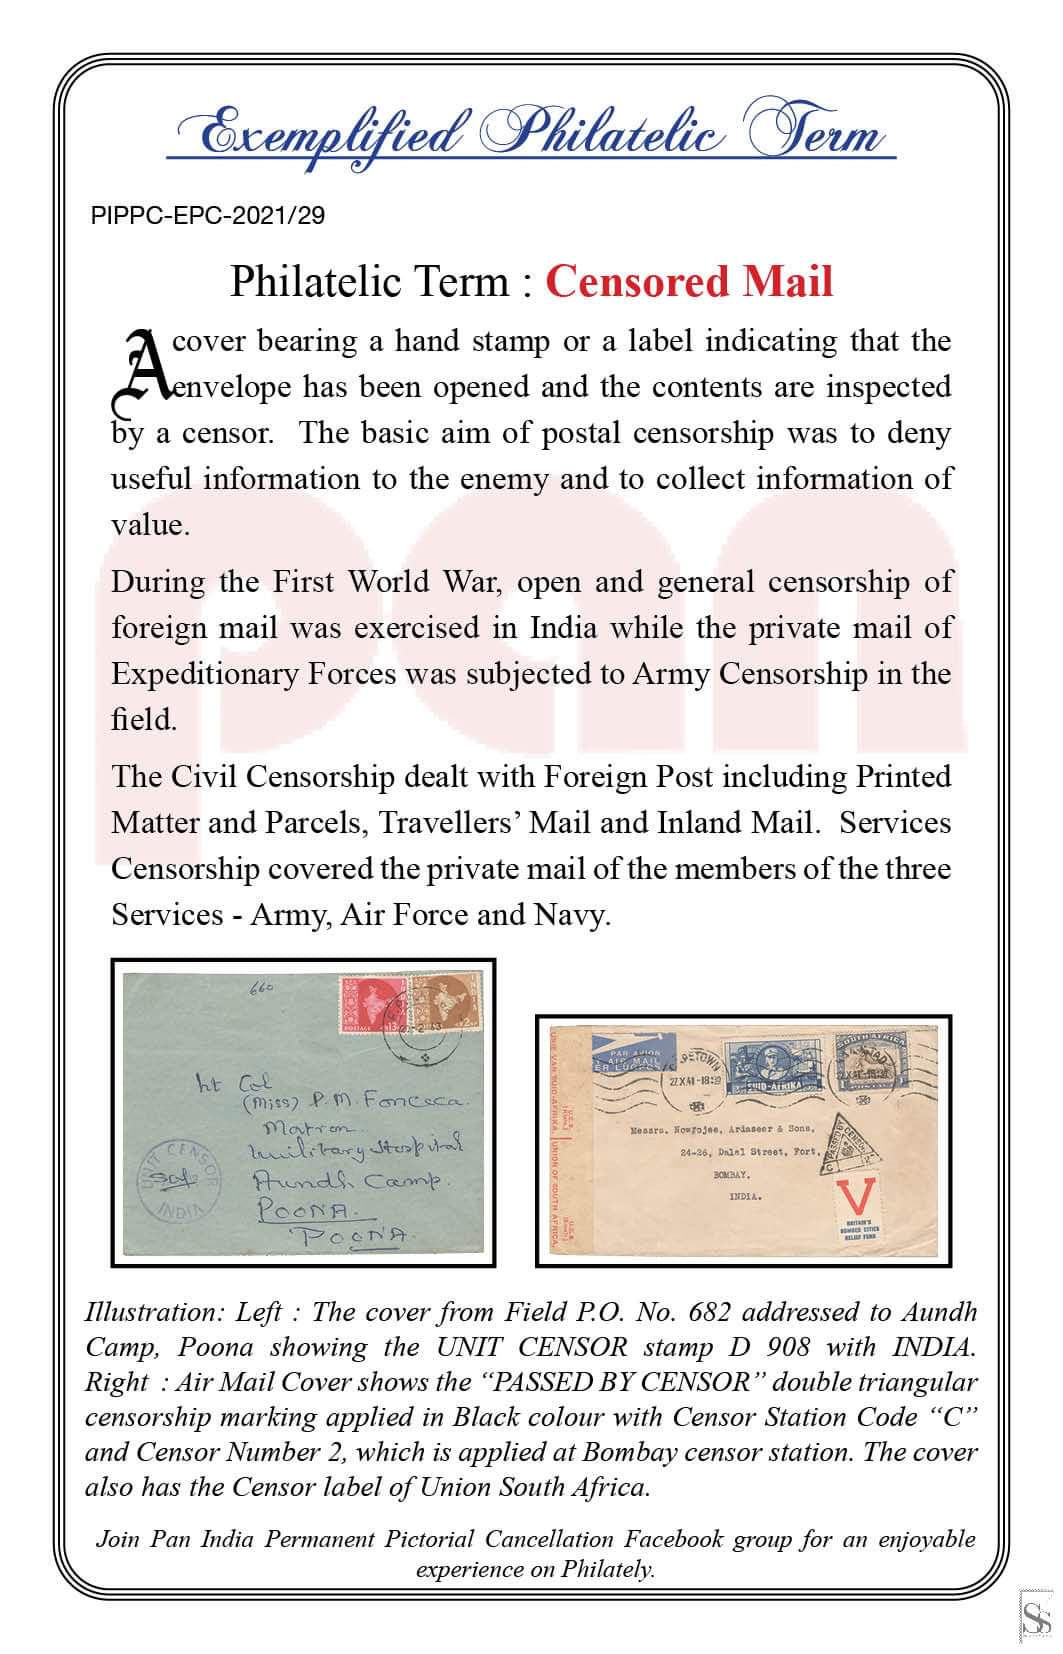 29. Today's Exemplified Philatelic term-Censored Mail